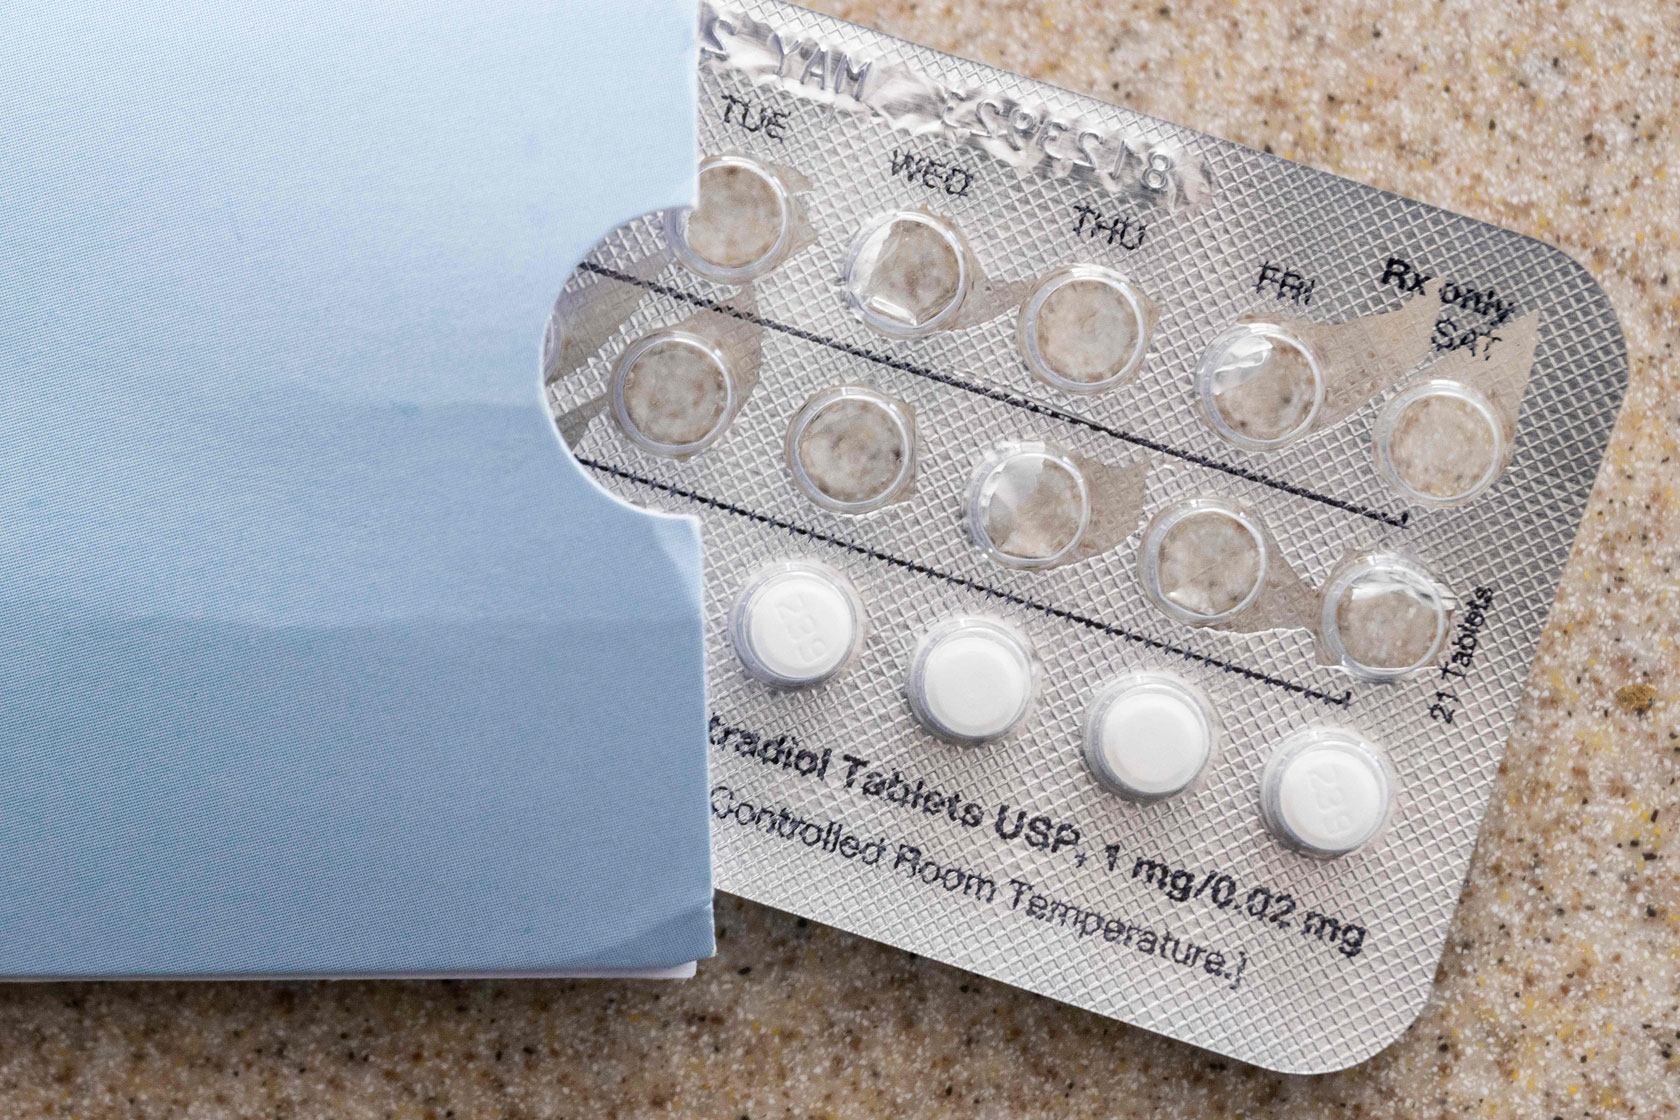 8 Fertility Drugs For Women: When To Use And How They Work